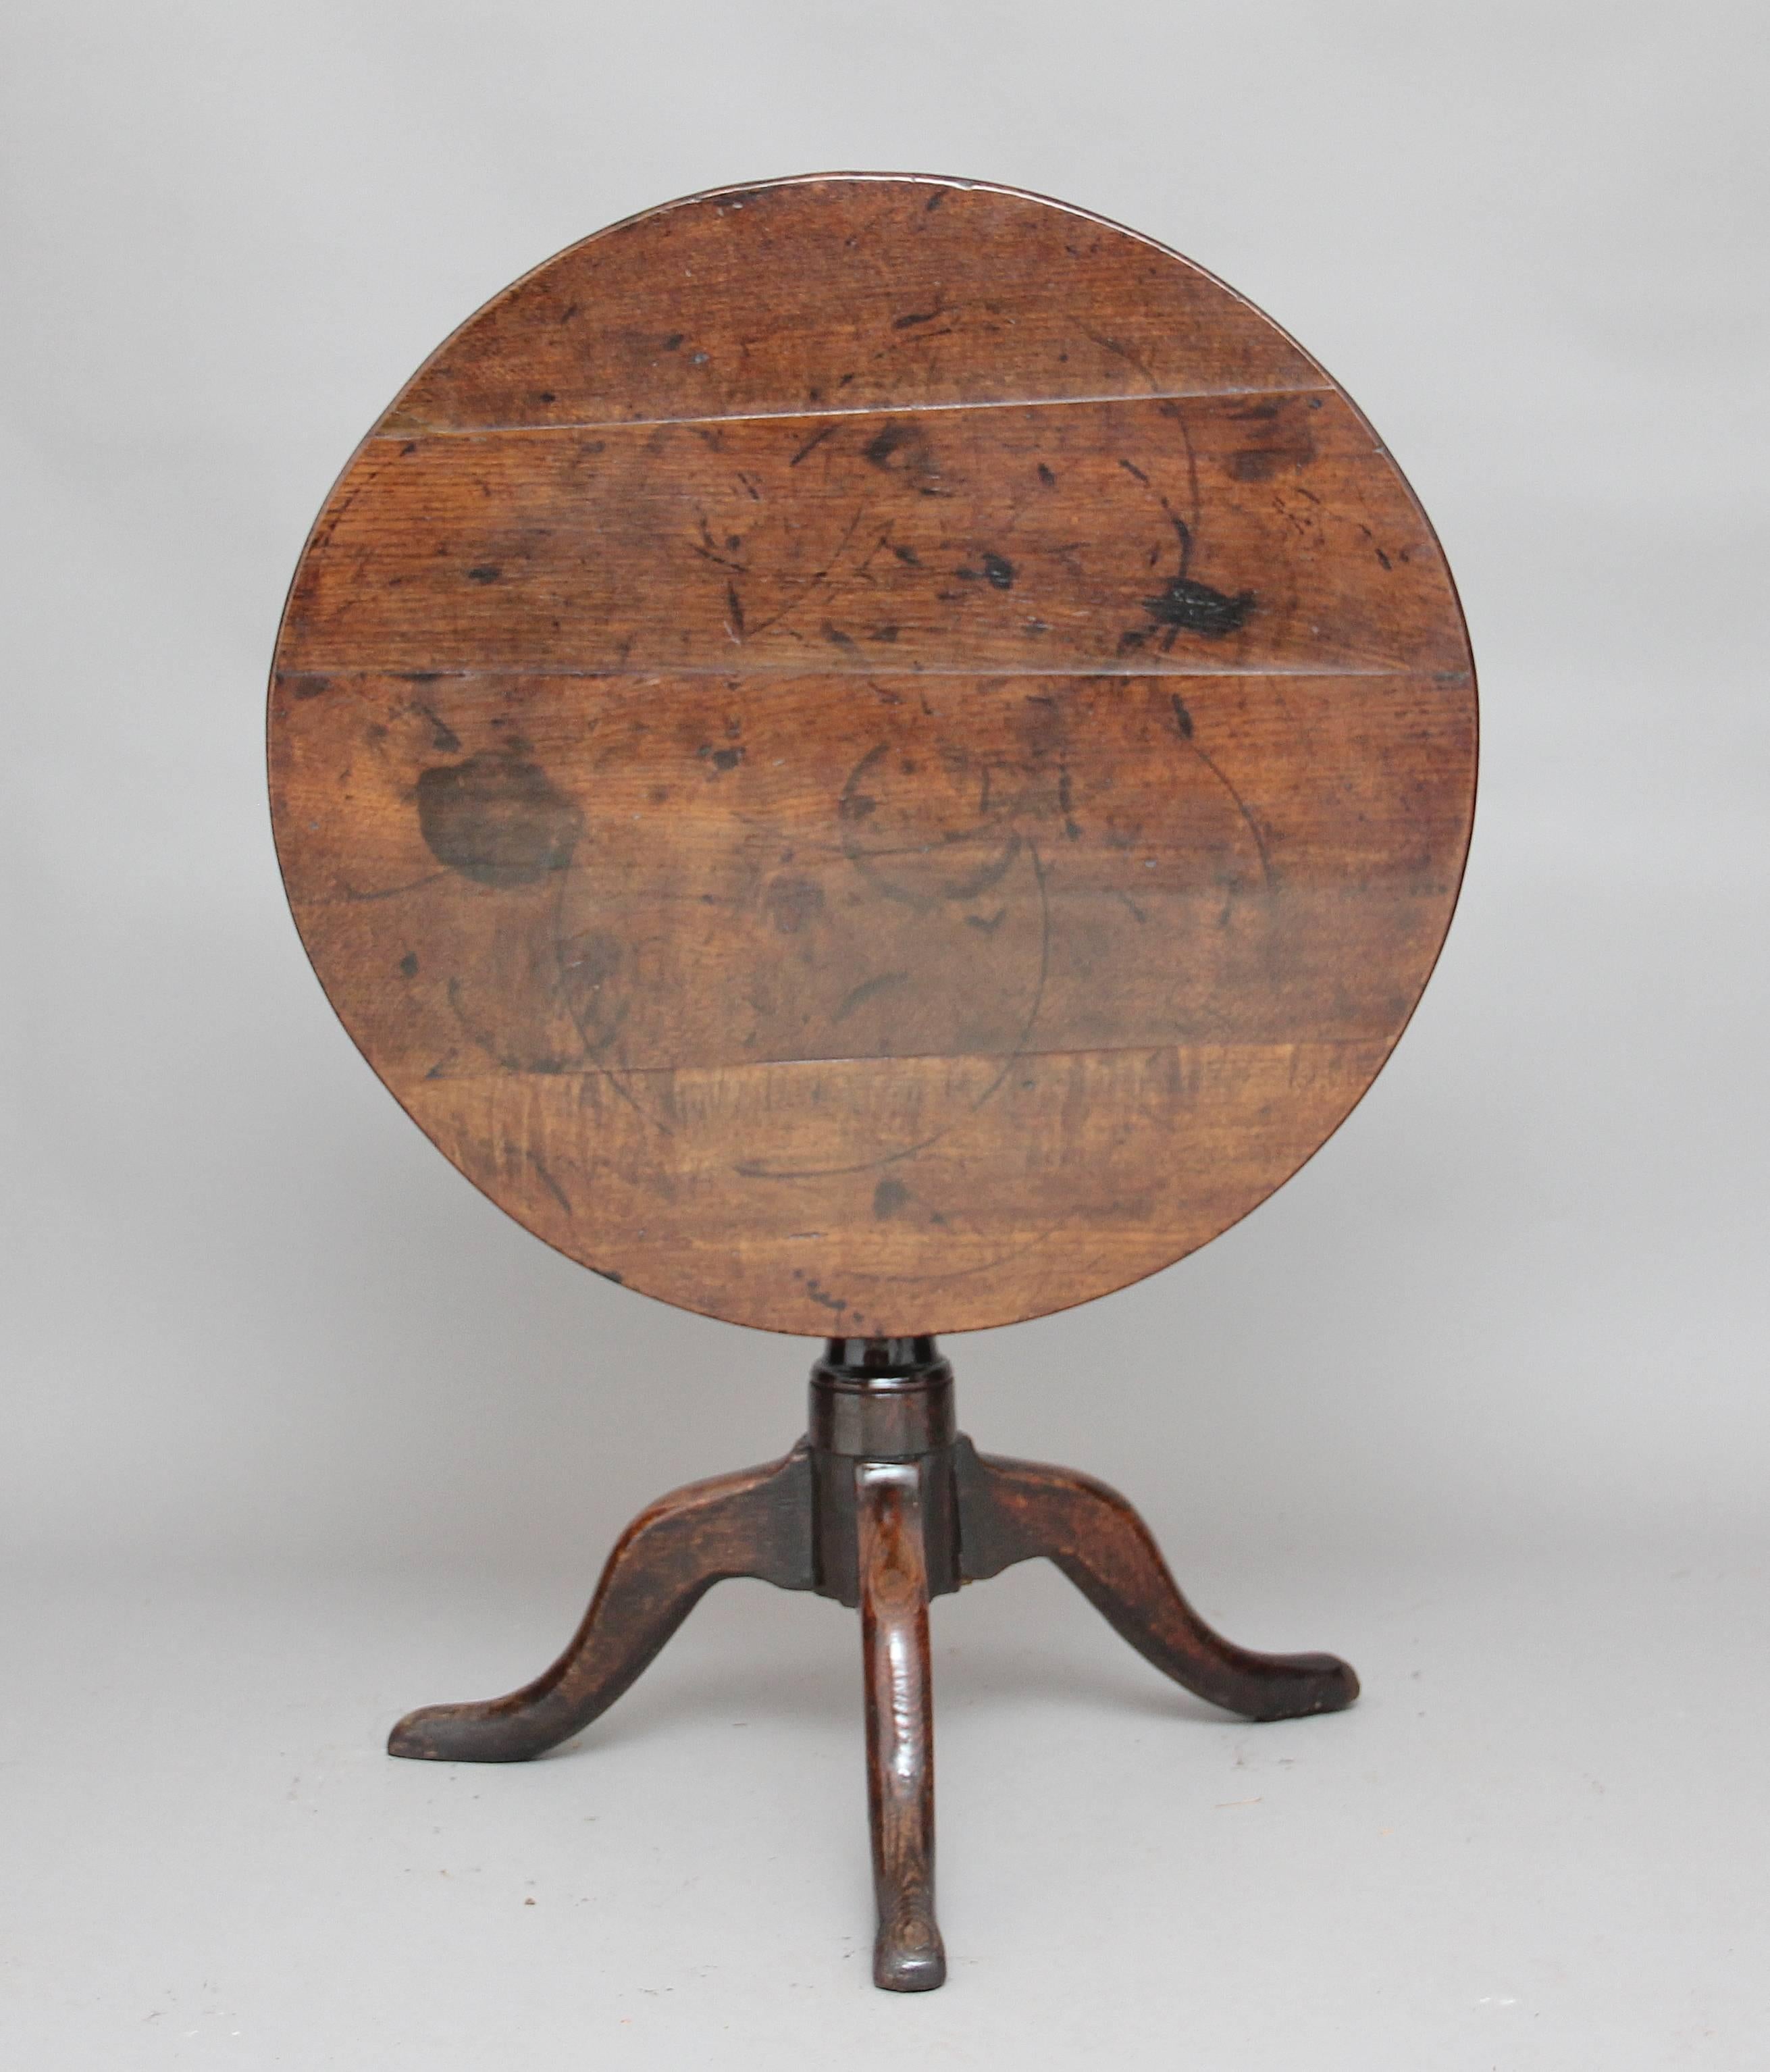 18th century oak tripod table with a planked top supported by a turned column standing on three shaped legs with pad feet, circa 1780.